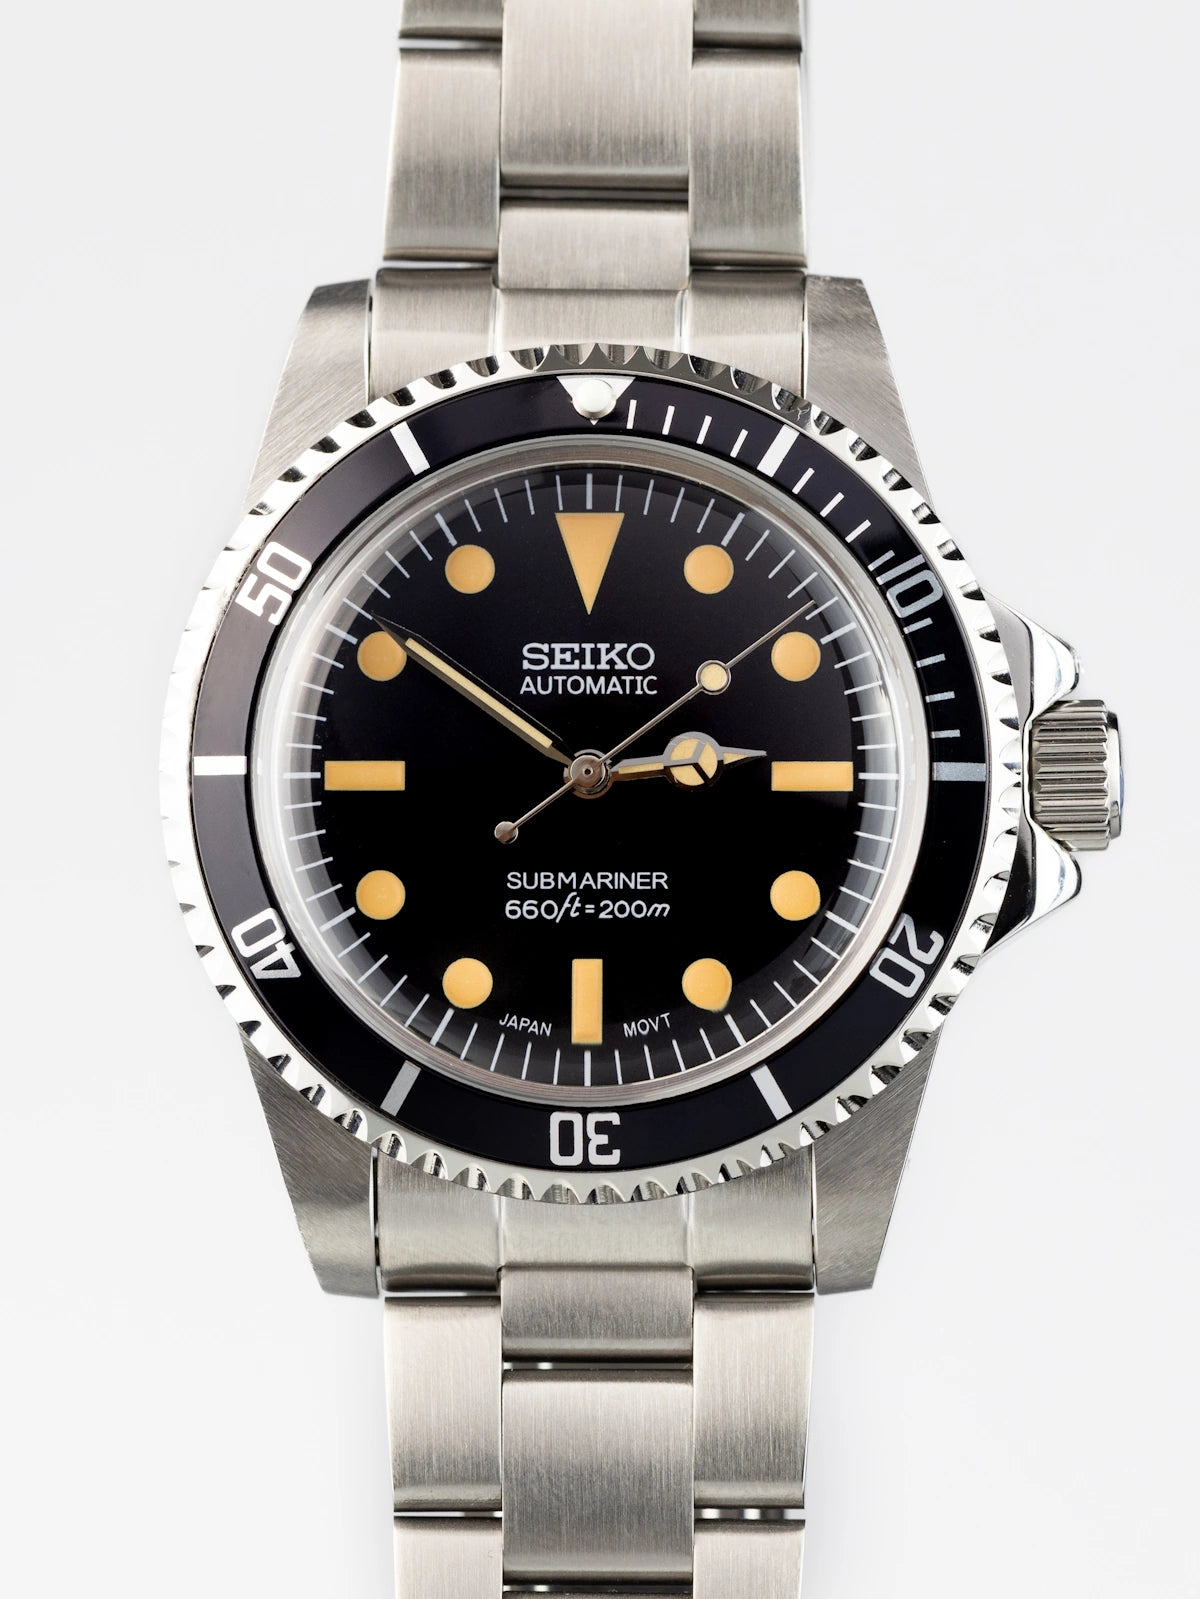 Seiko Mod Submariner T Dial Watch in Vintage Military Style